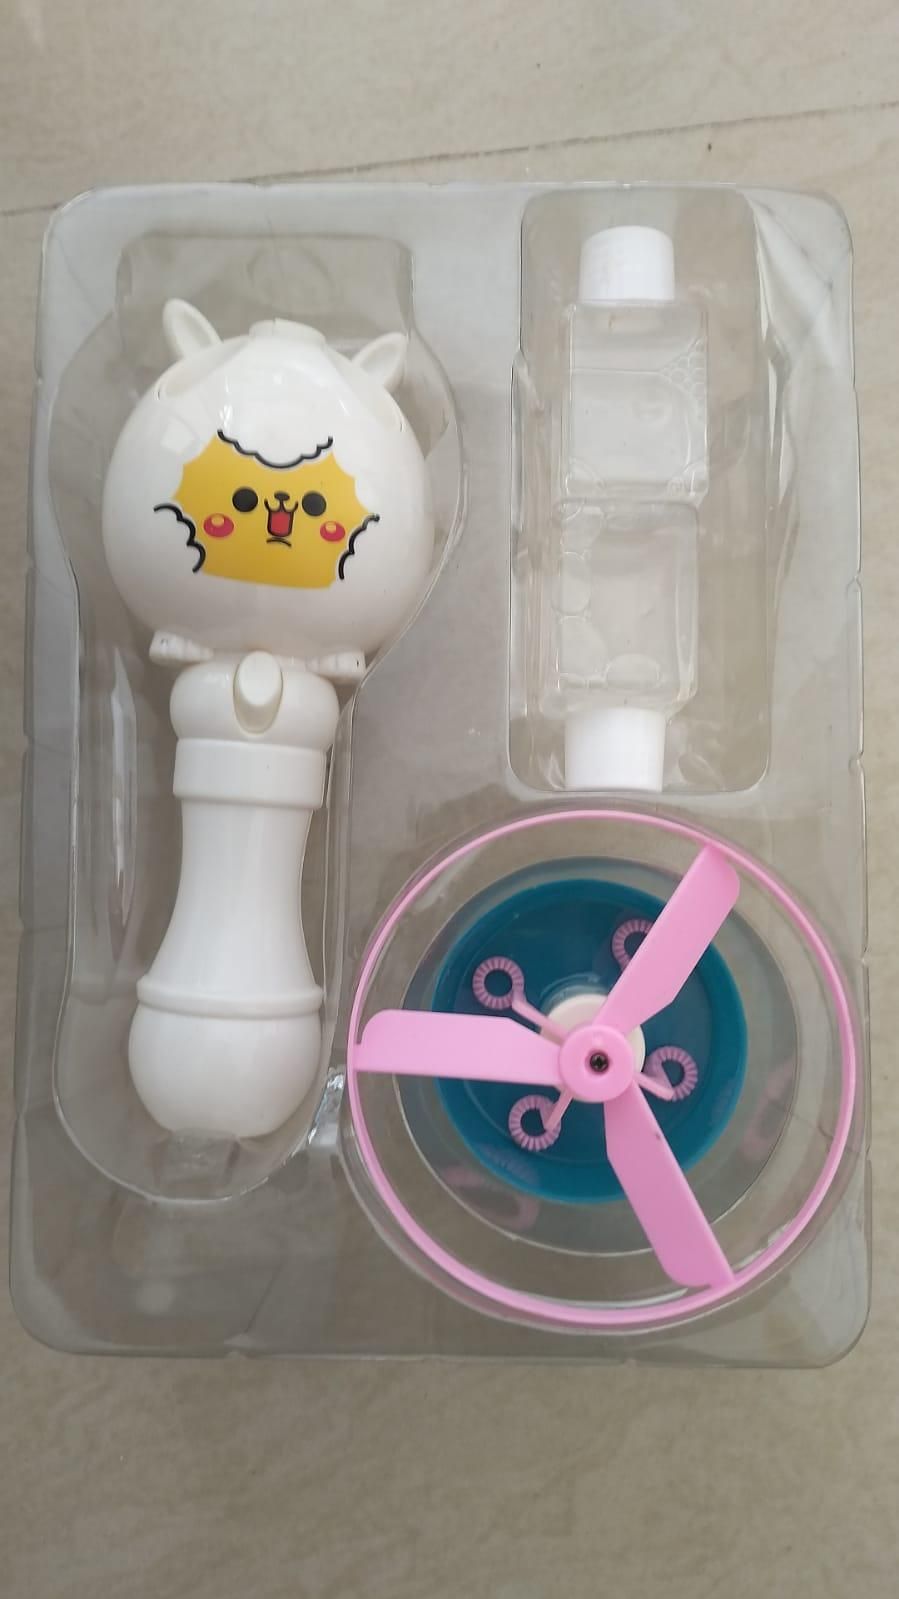 Dragonfly Bubble Wand Toy